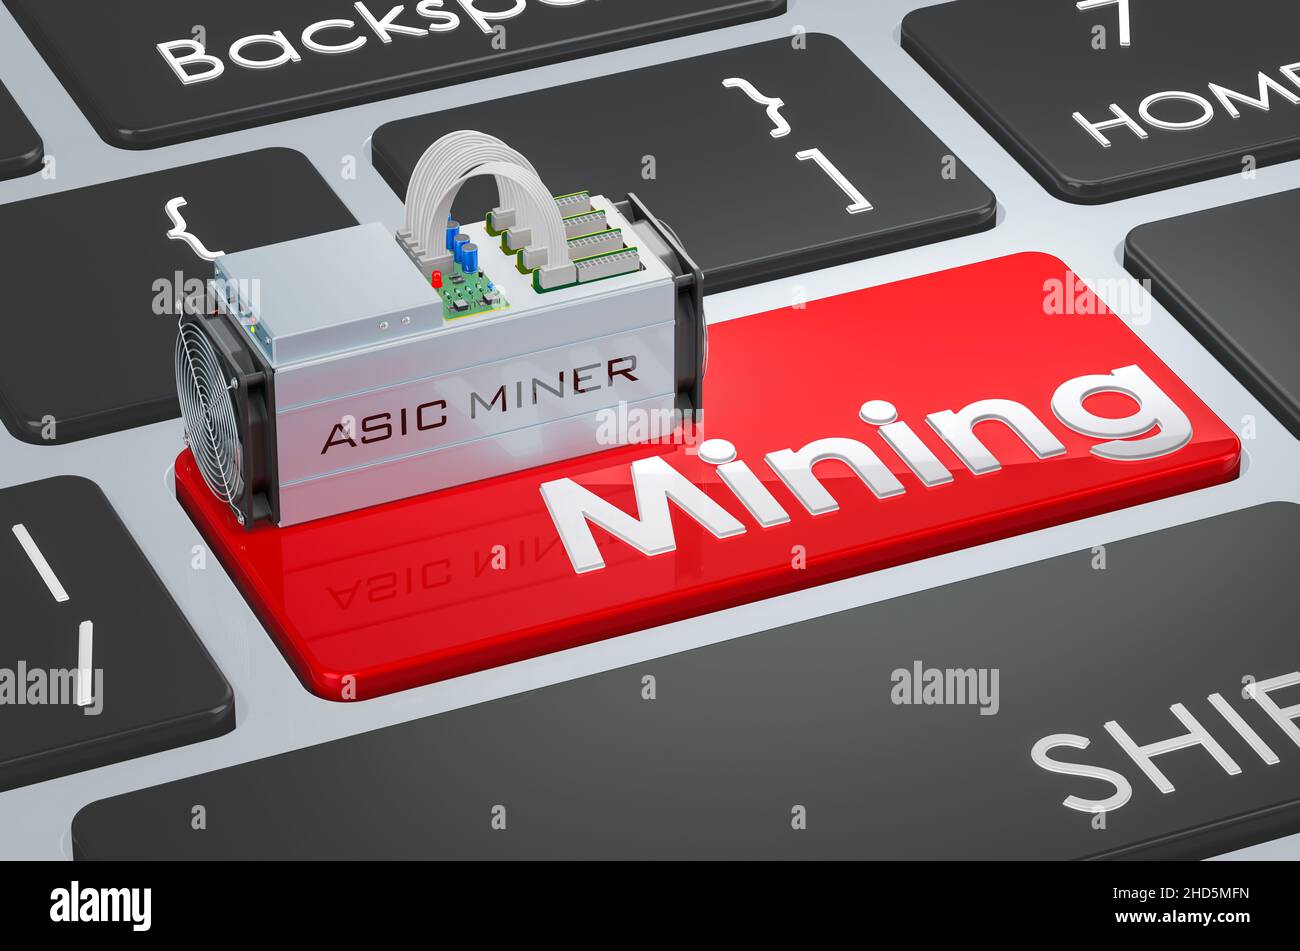 104 Asic Miner Usb Images, Stock Photos, 3D objects, & Vectors